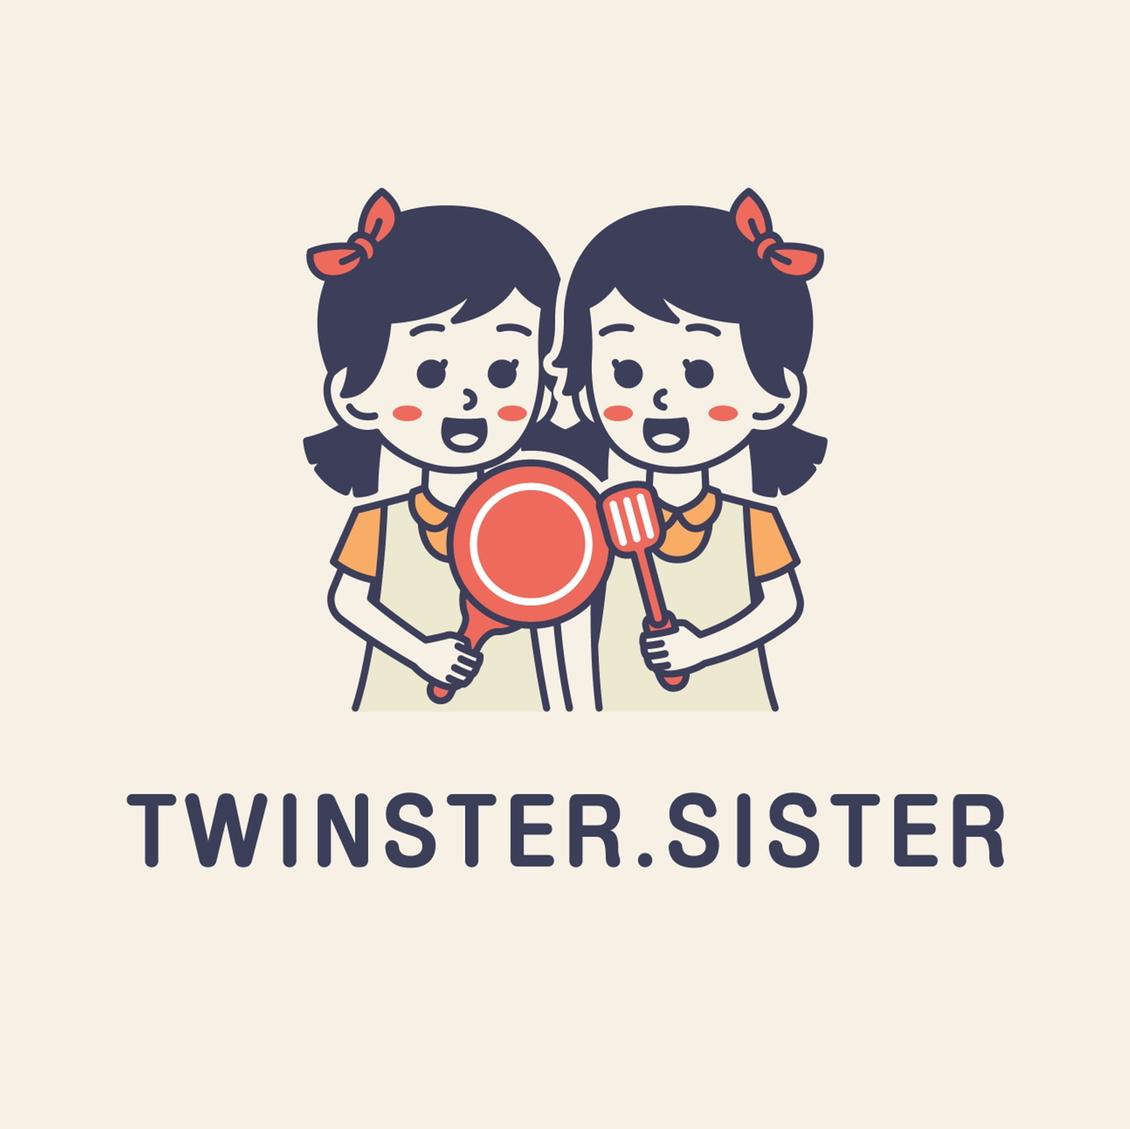 Twinster.sister